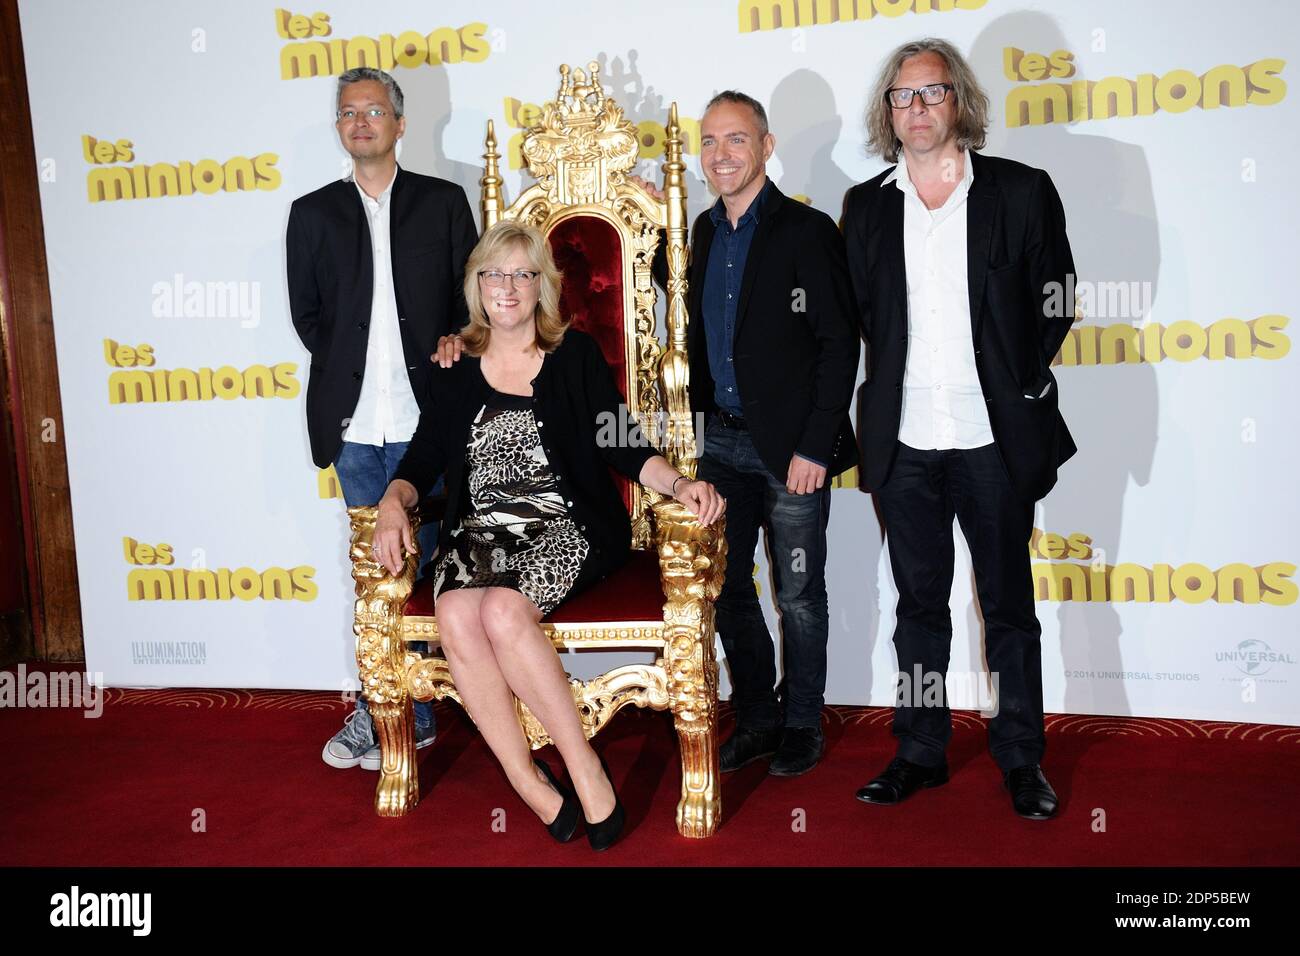 Pierre Coffin, producer Janet Healy, Kyle Balda and guest attending the premiere for the film Minions (Les Minions) at Le Grand Rex in Paris, France on June 23, 2015. Photo by Aurore Marechal/ABACAPRESS.COM Stock Photo